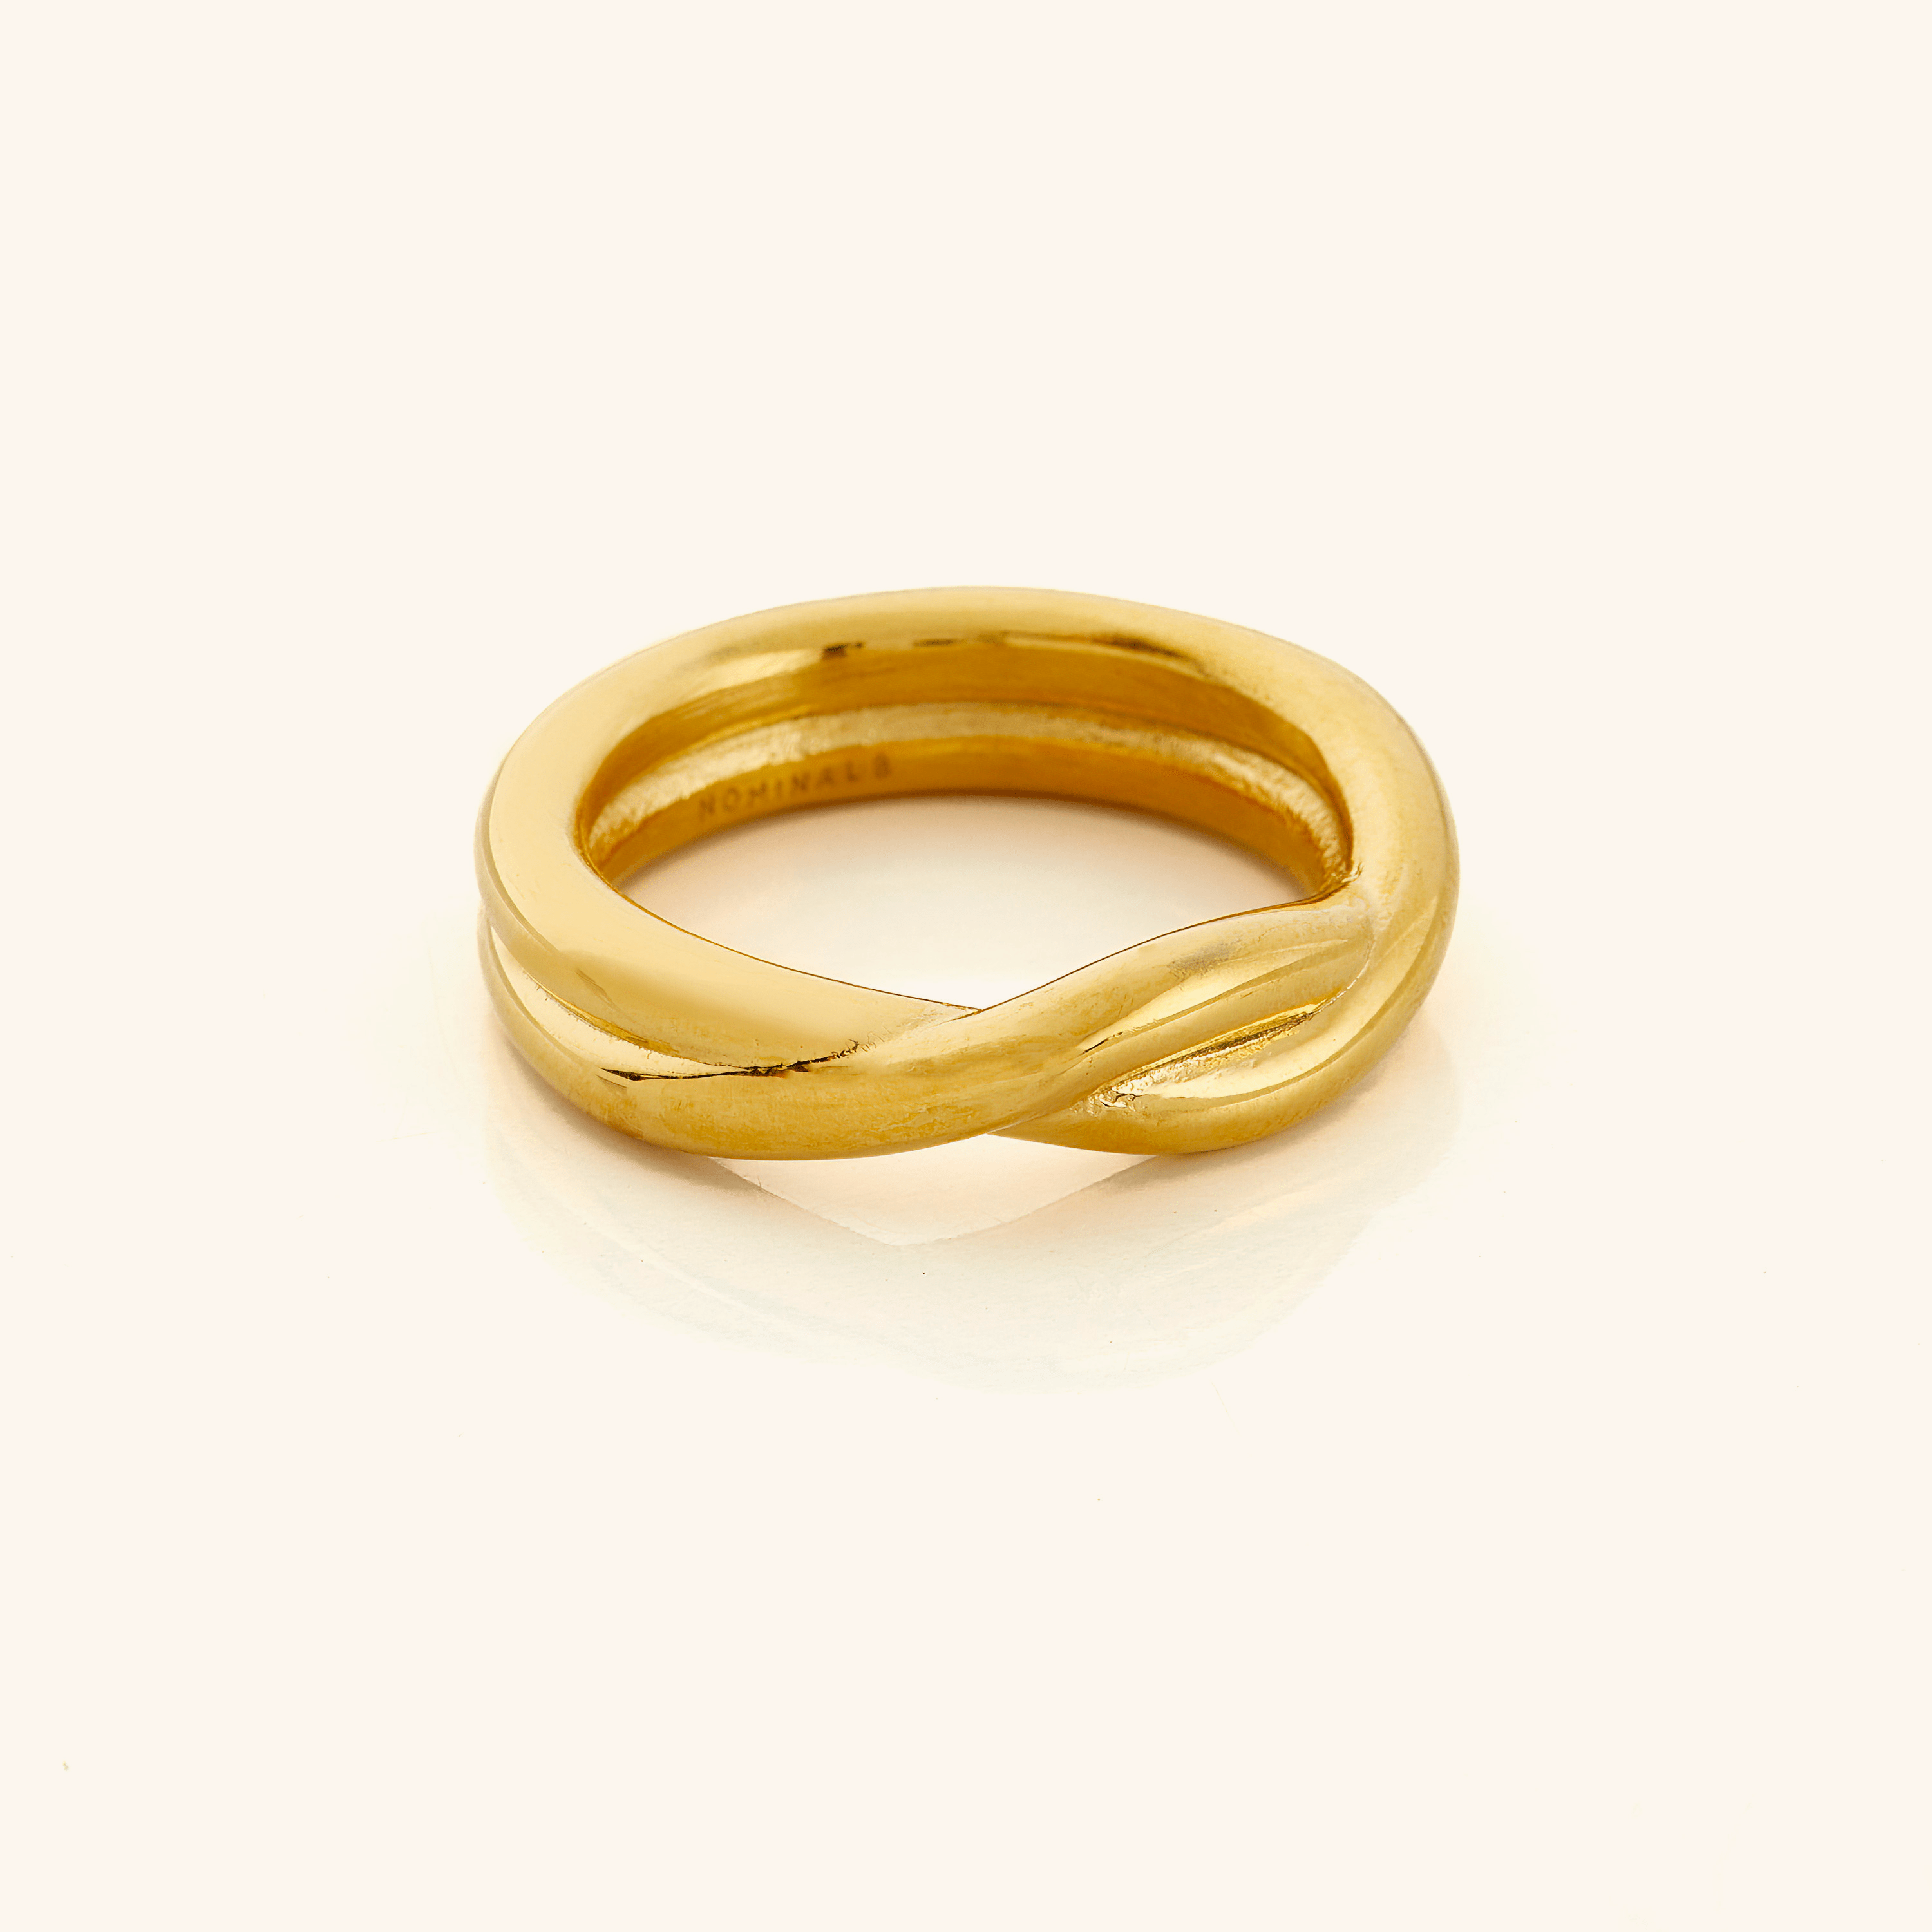 Gold Wedding Ring Price Starting From Rs 3,000/Gm. Find Verified Sellers in  Mangalore - JdMart